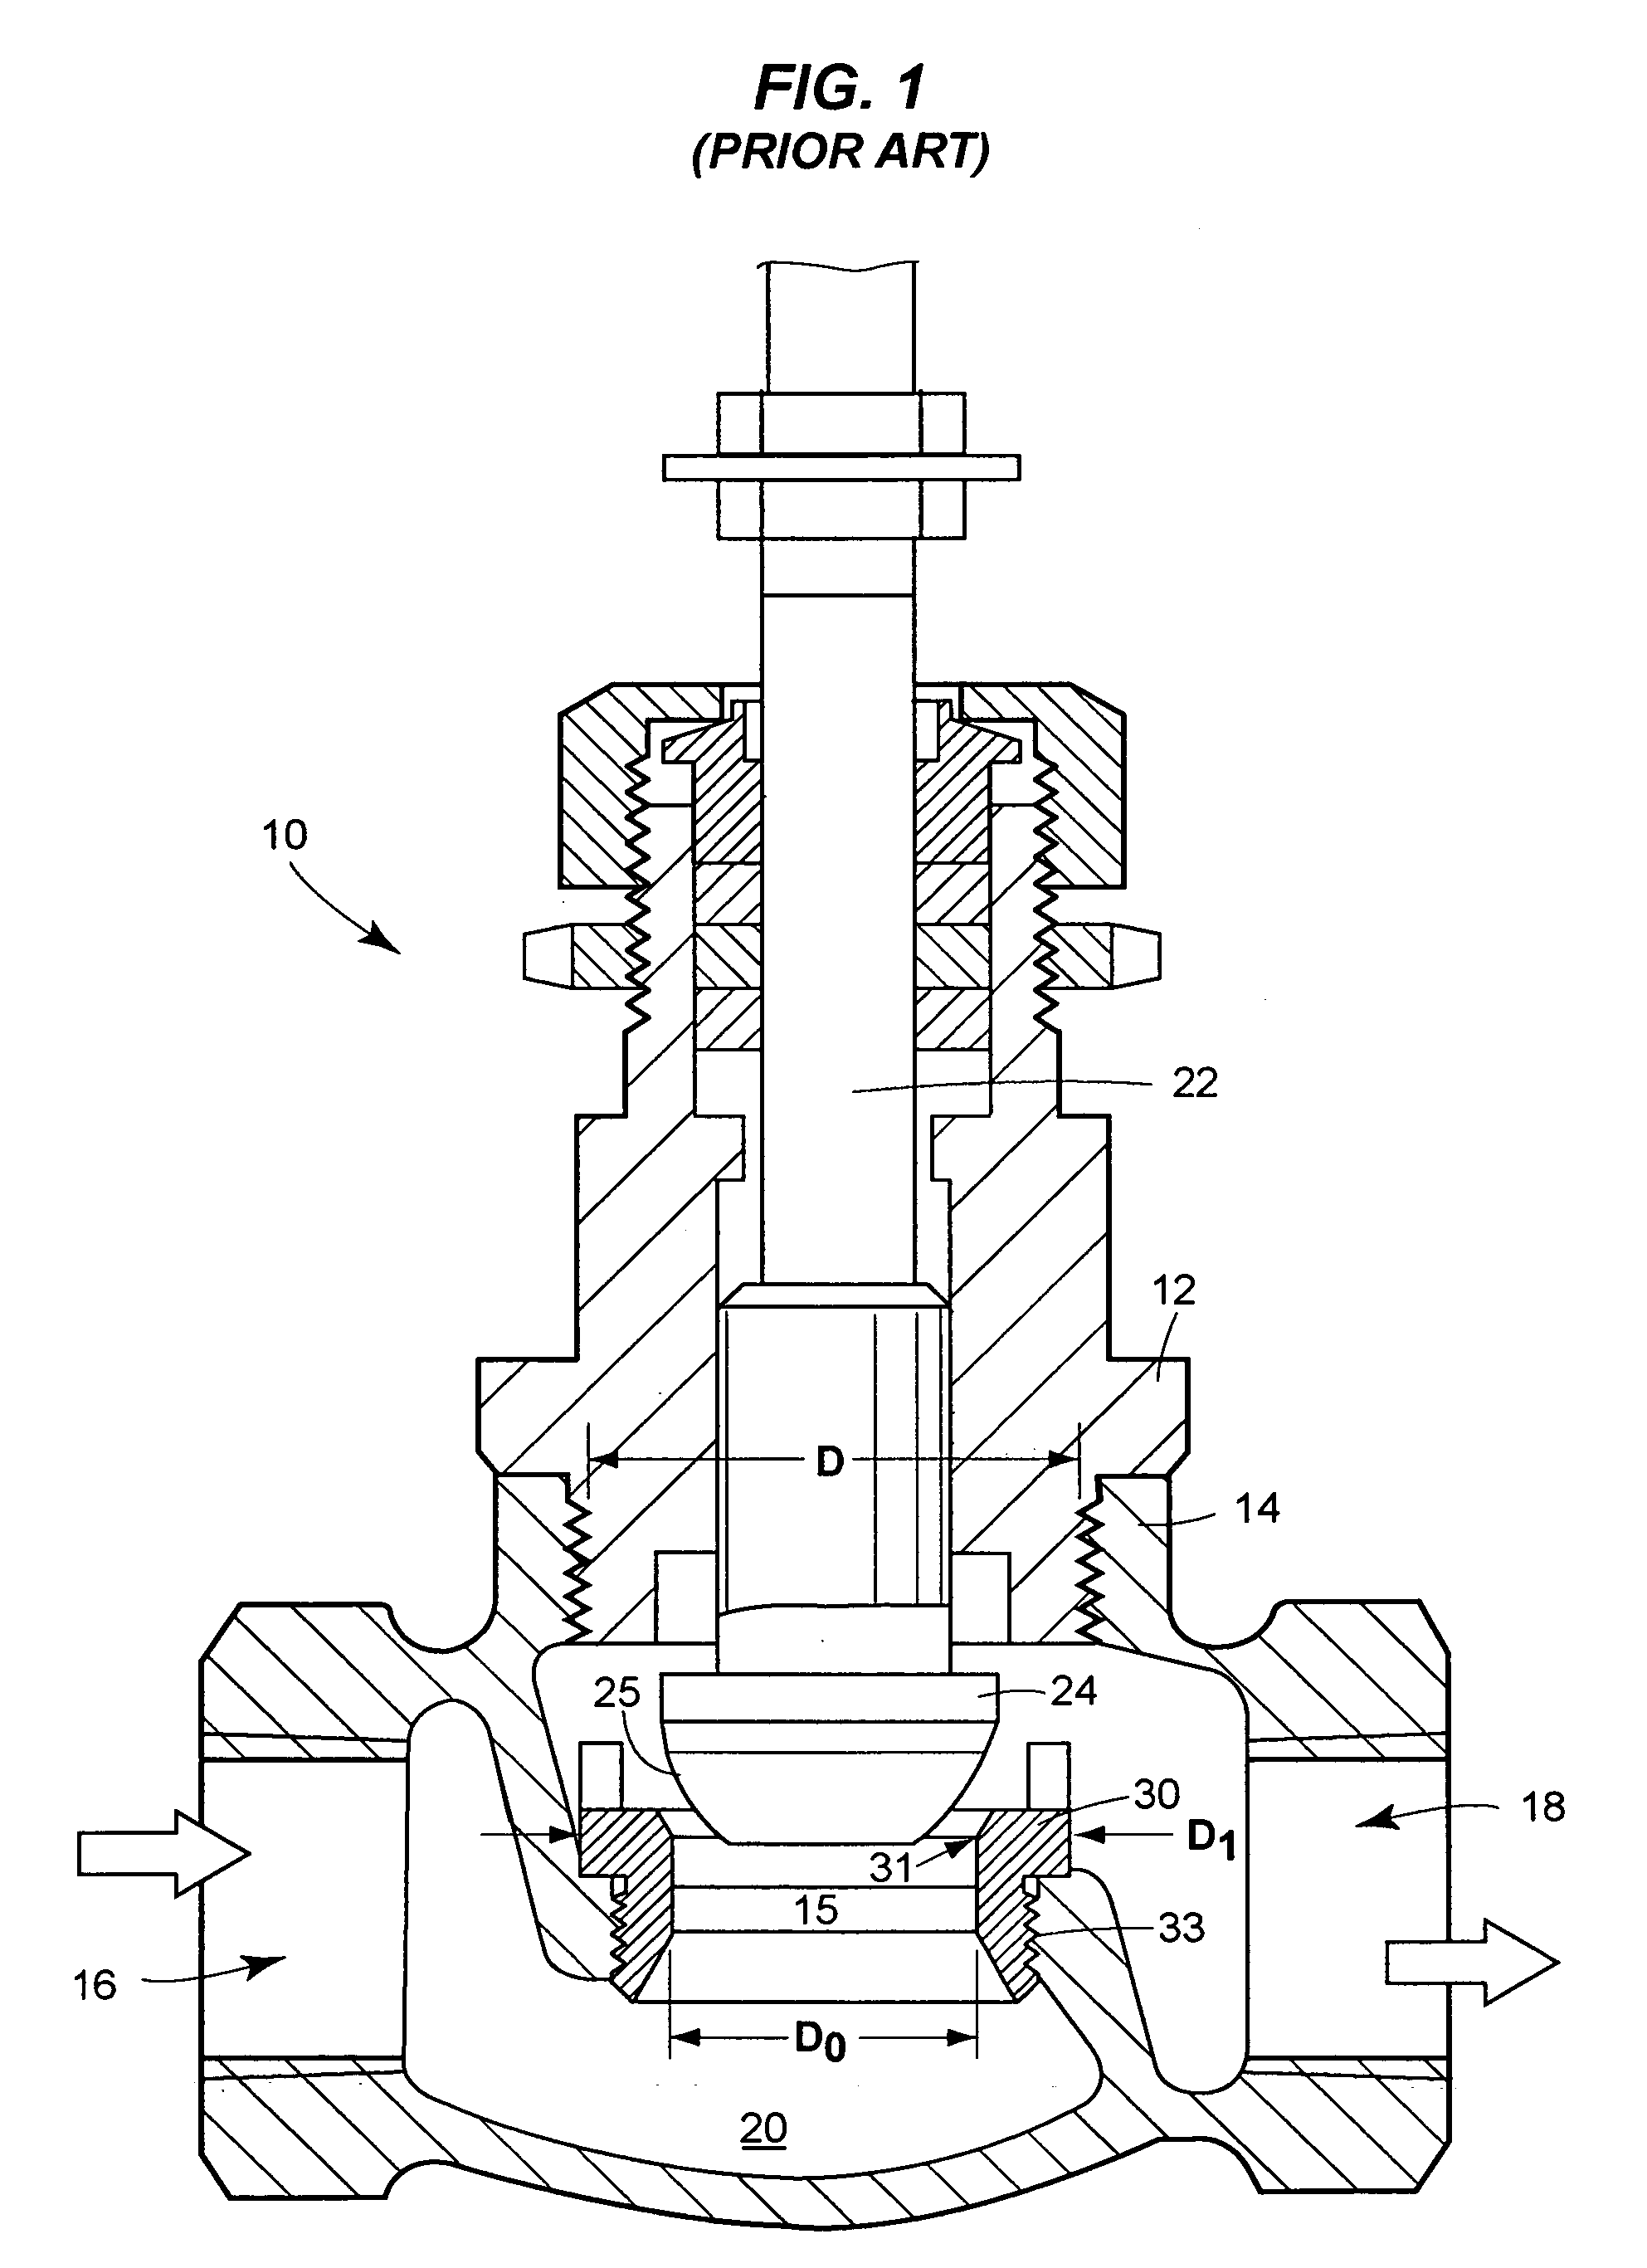 Control valve with low noise and enhanced flow characteristics